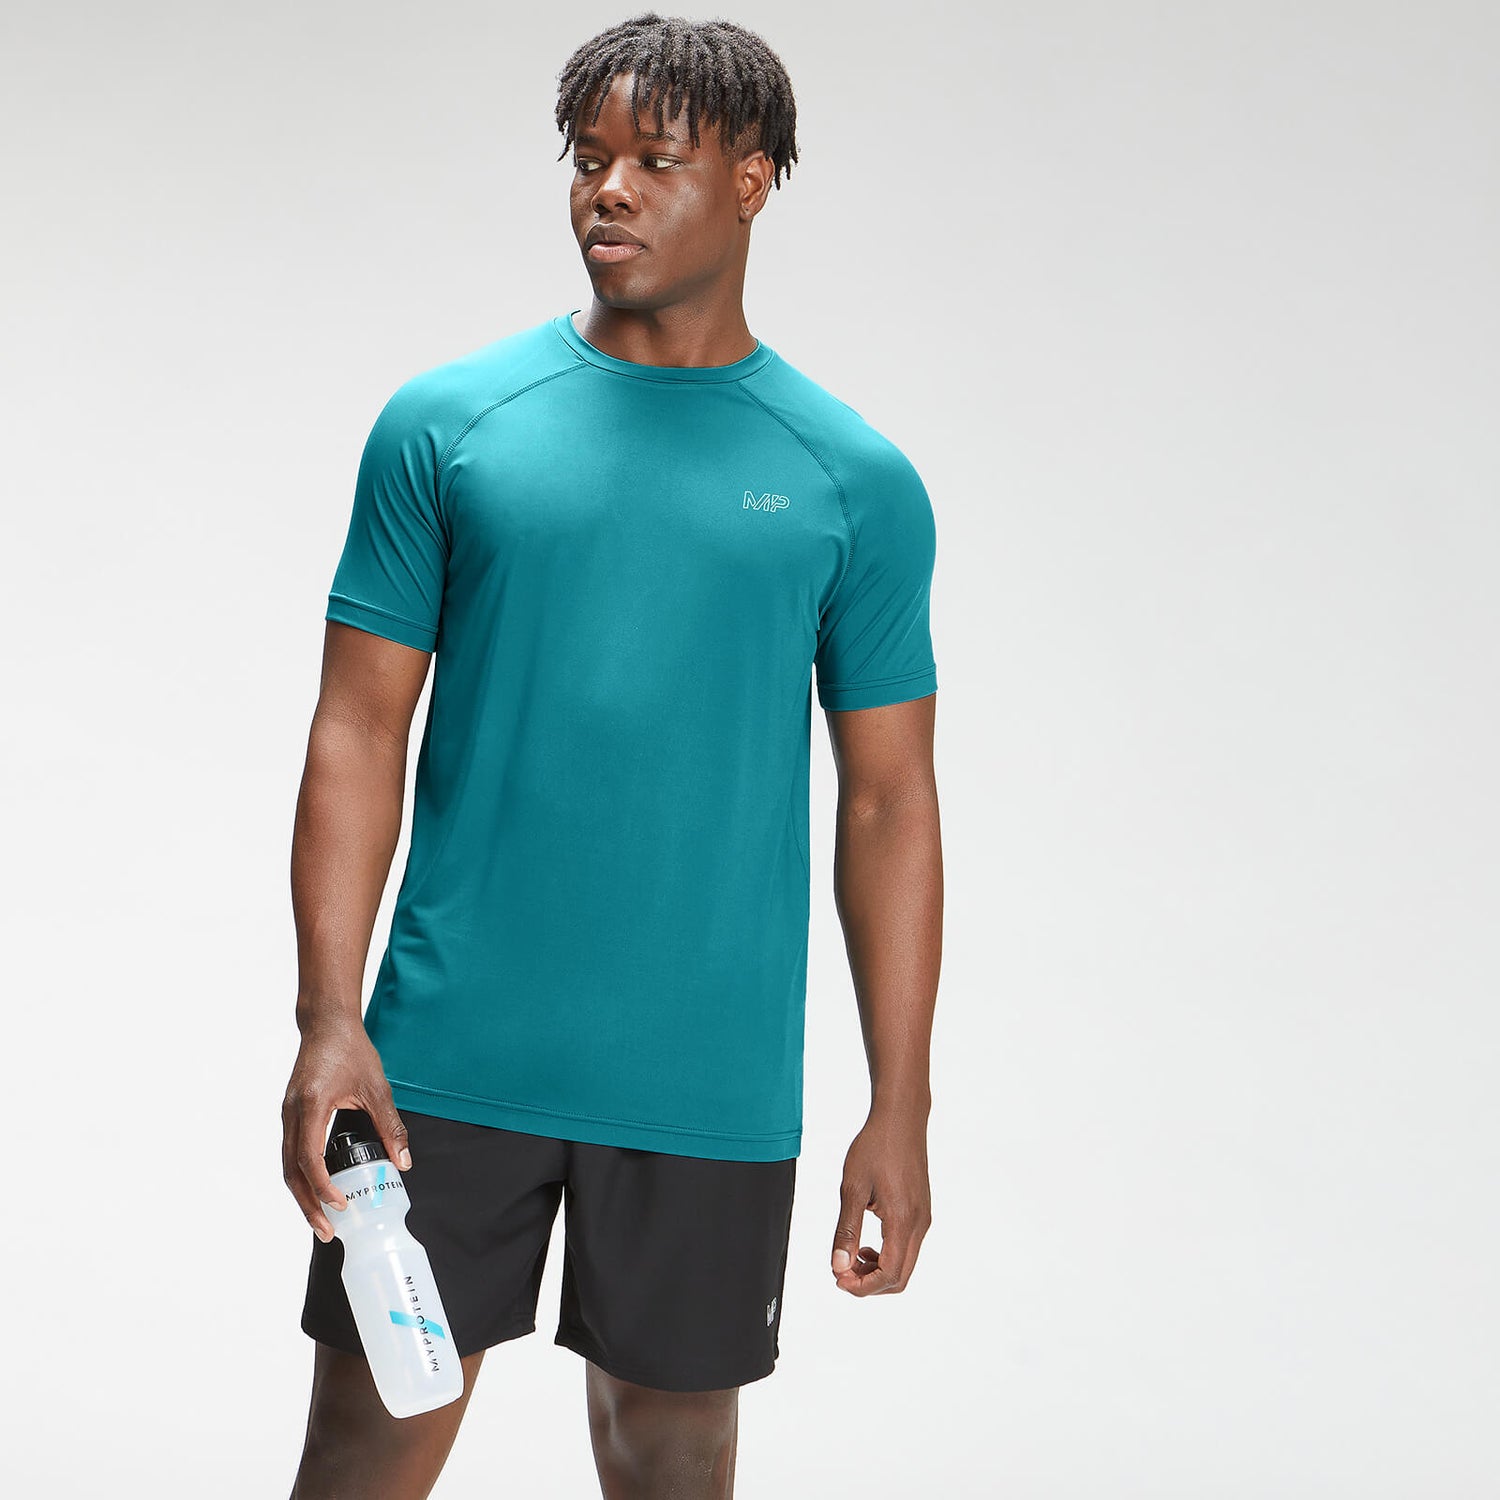 MP Men's Repeat Mark Graphic Training Short Sleeve T-Shirt - Teal - XS